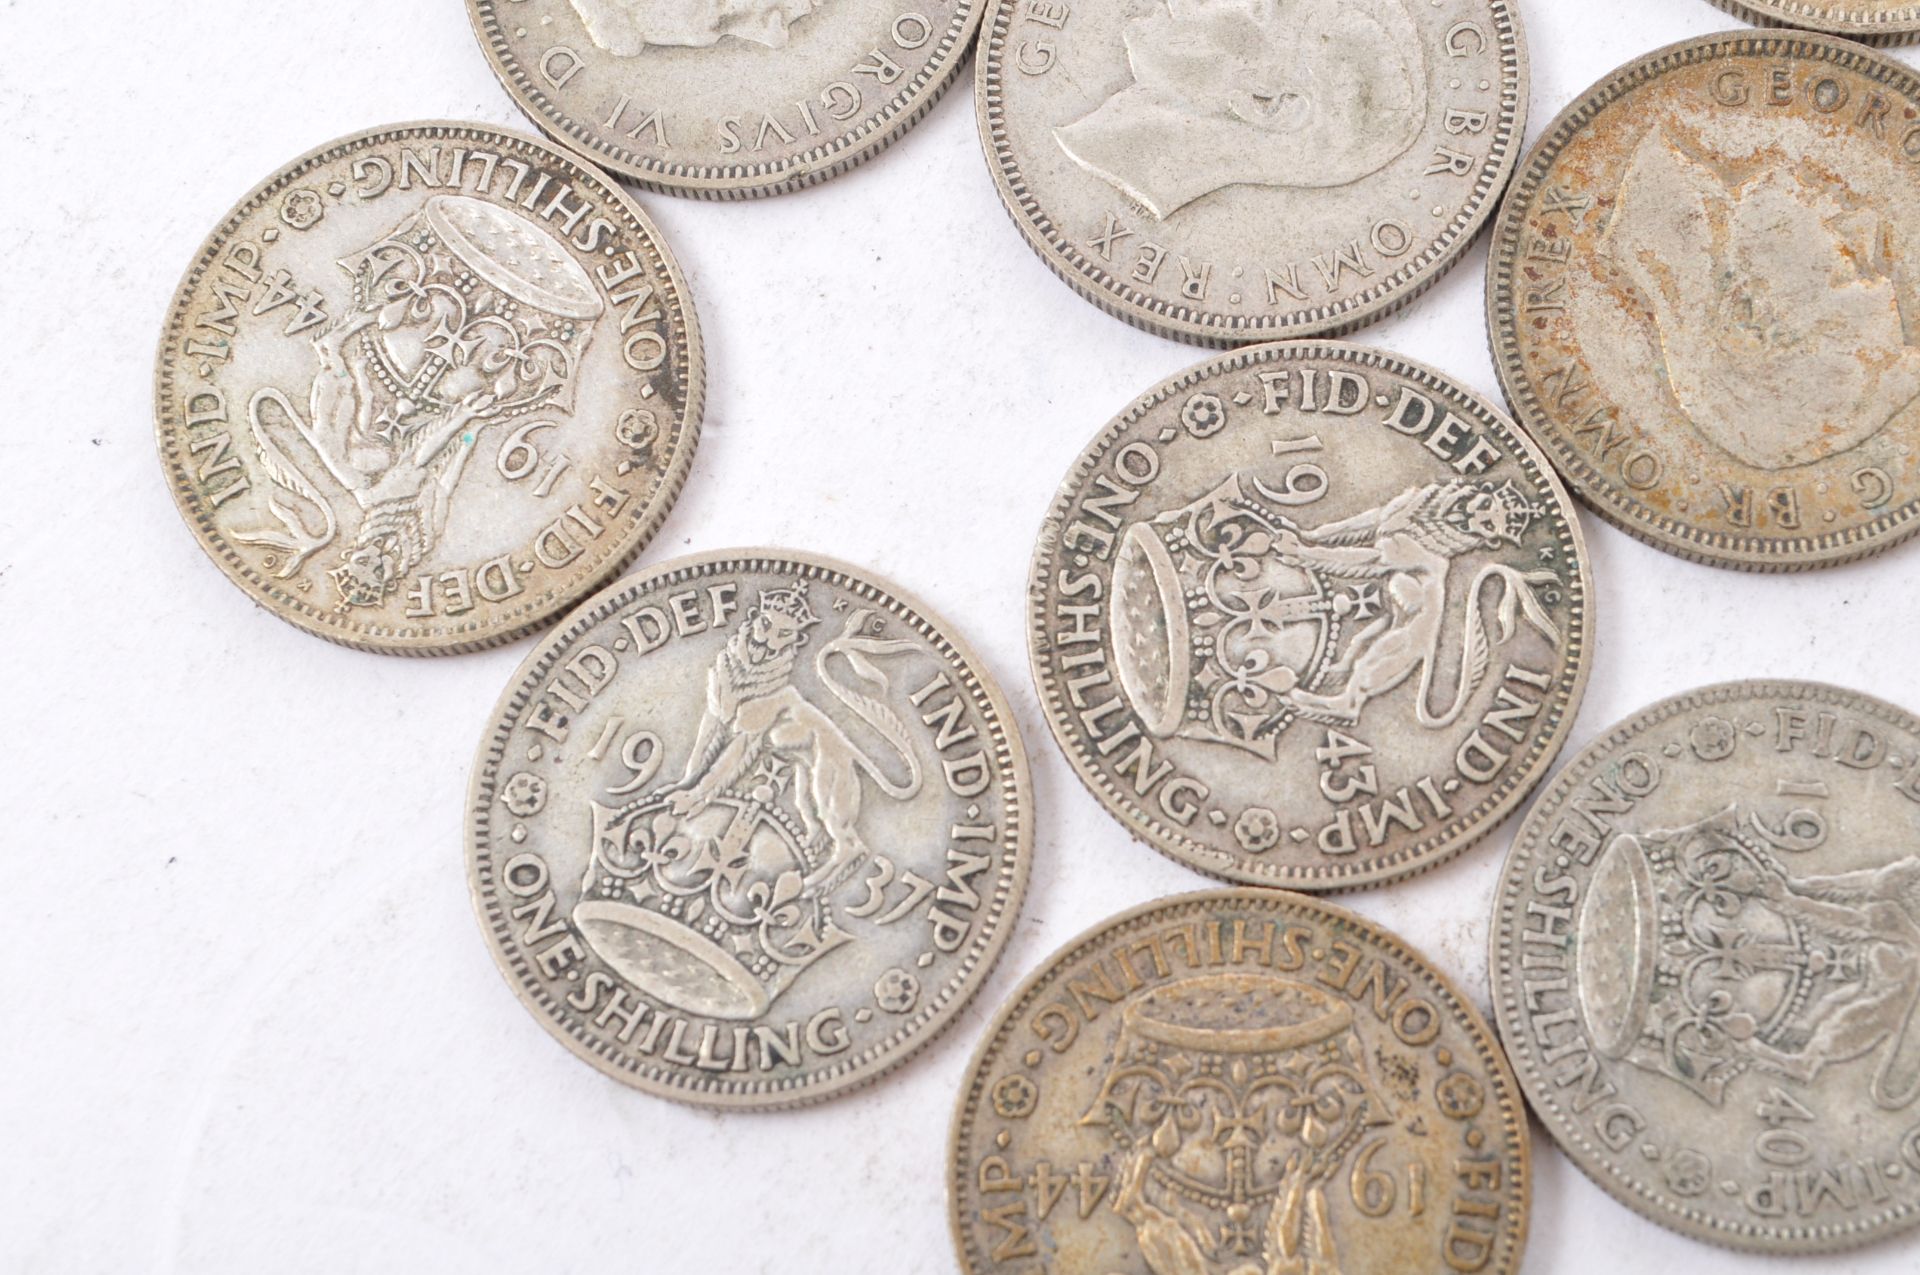 COLLECTION OF 20TH CENTURY SHILLING COINS - 322G - Image 6 of 6